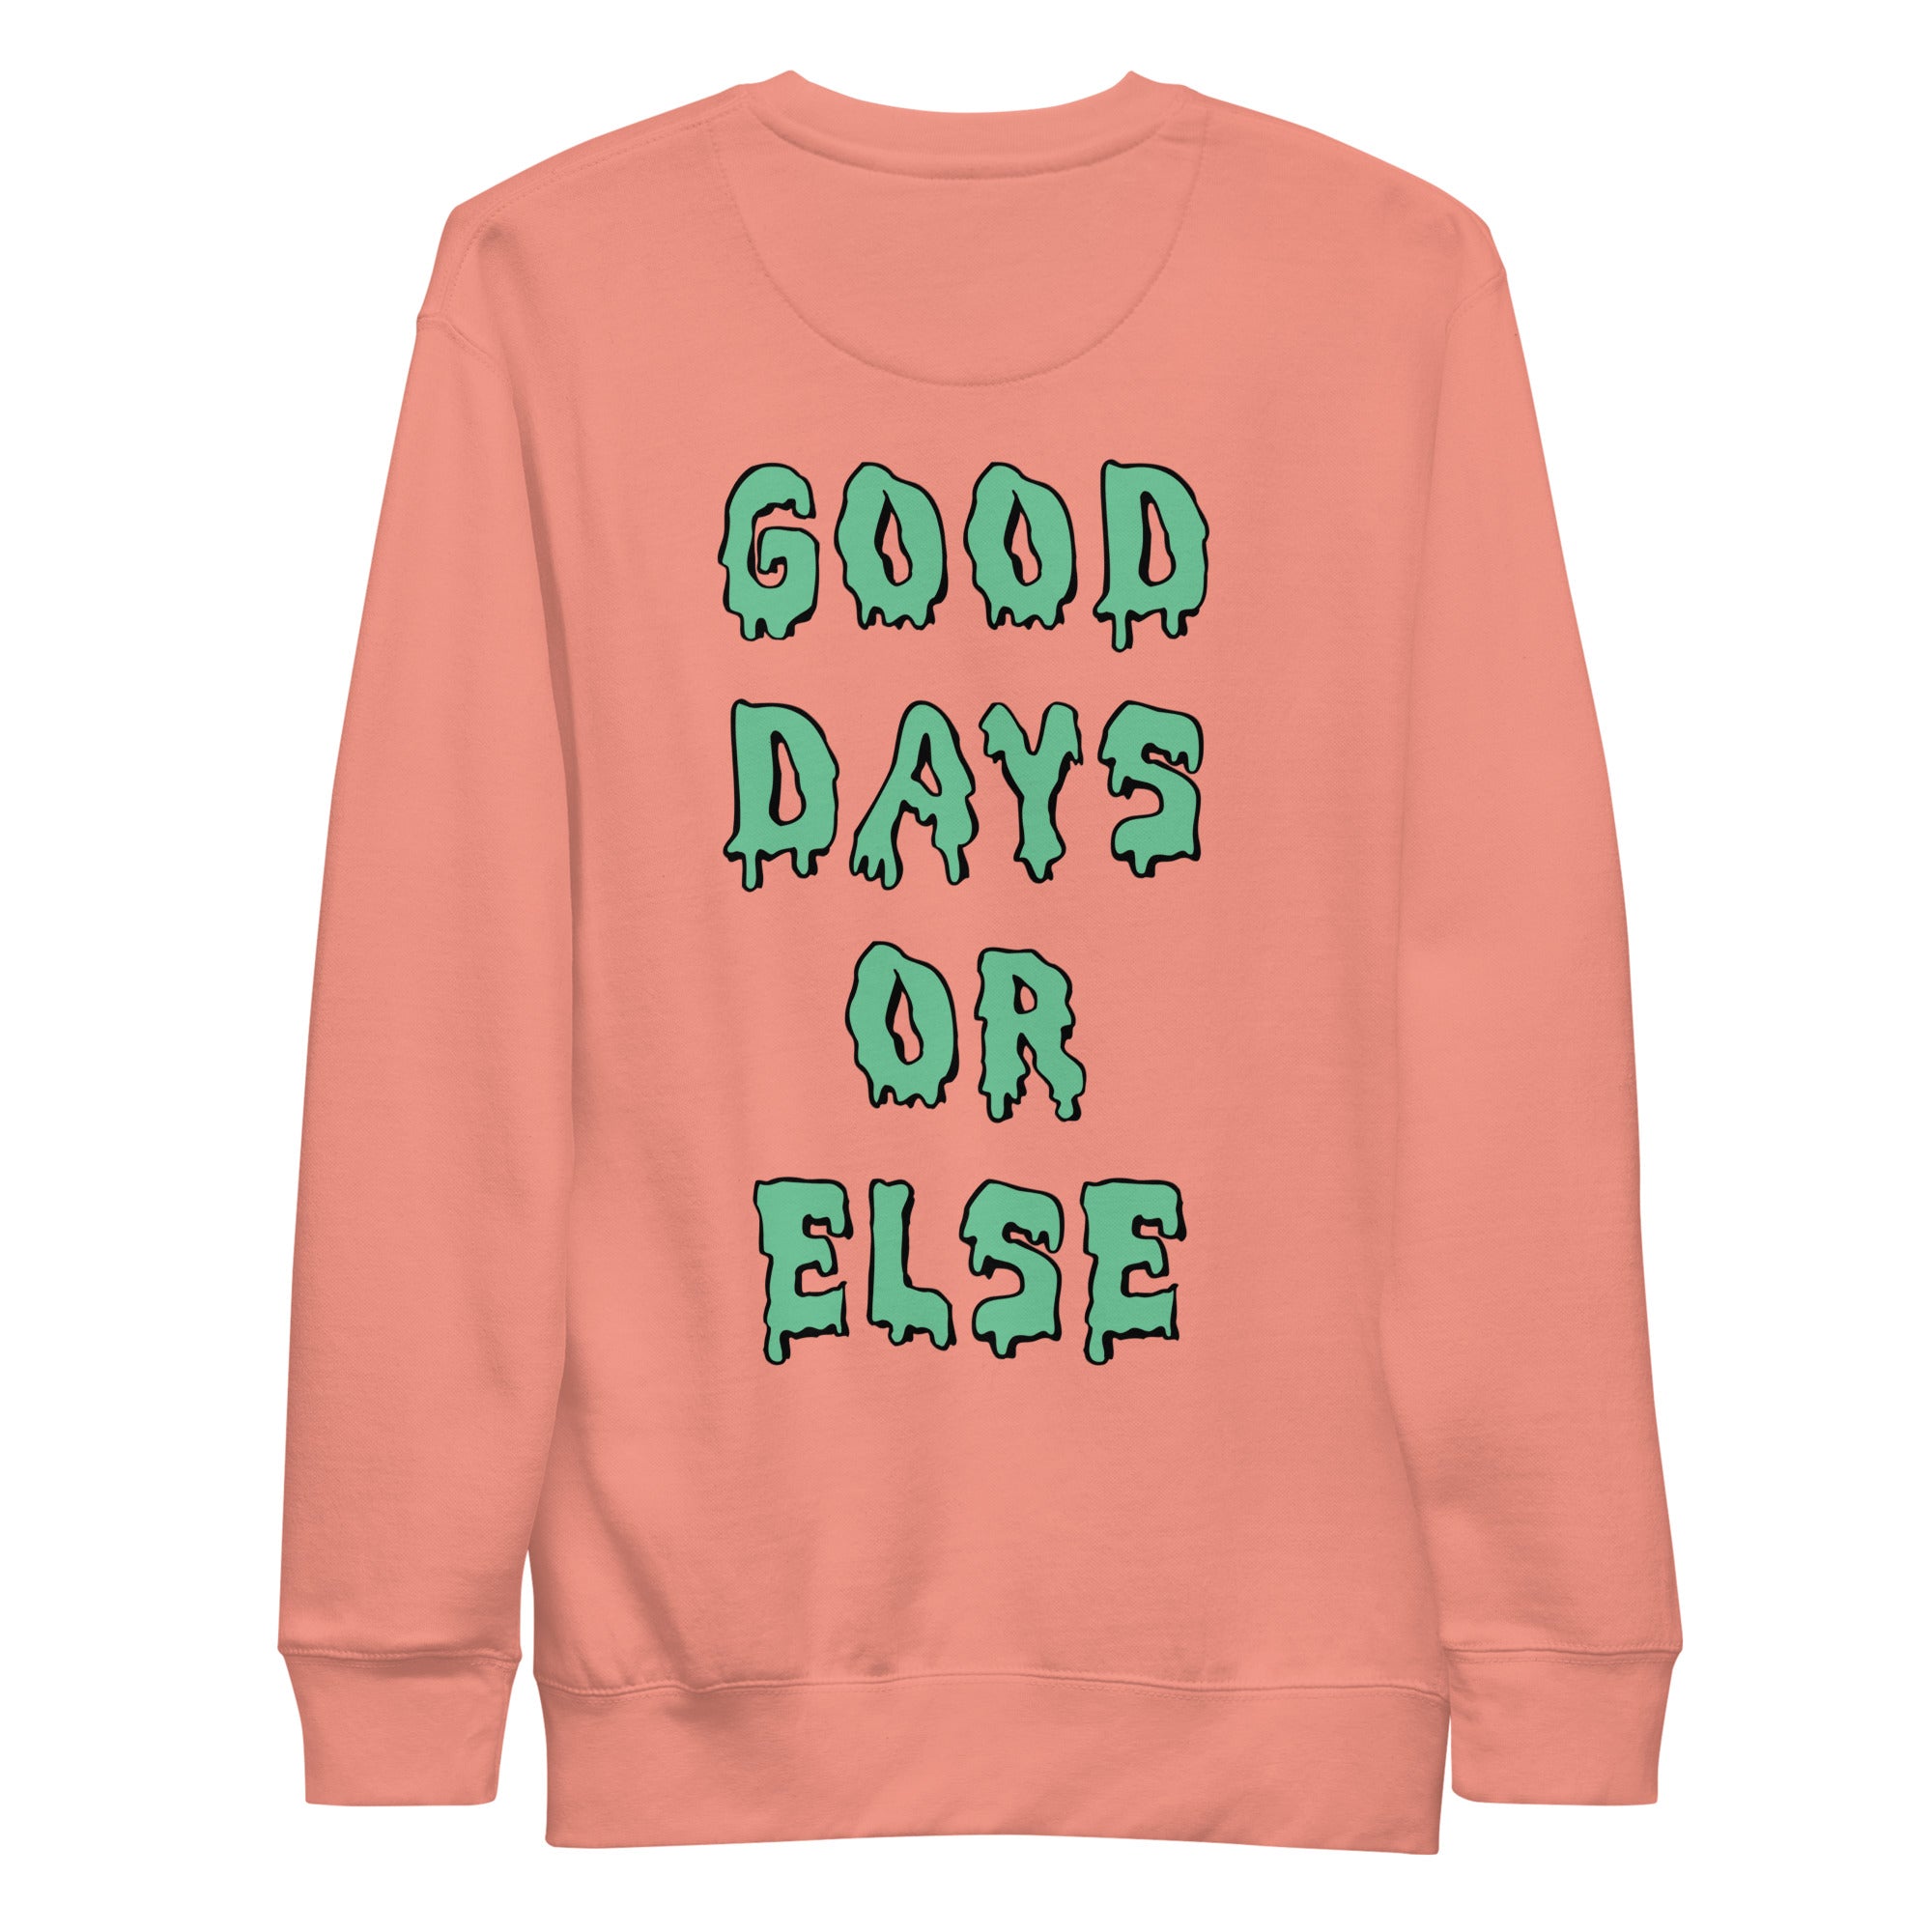 Good Days or Else Sweater